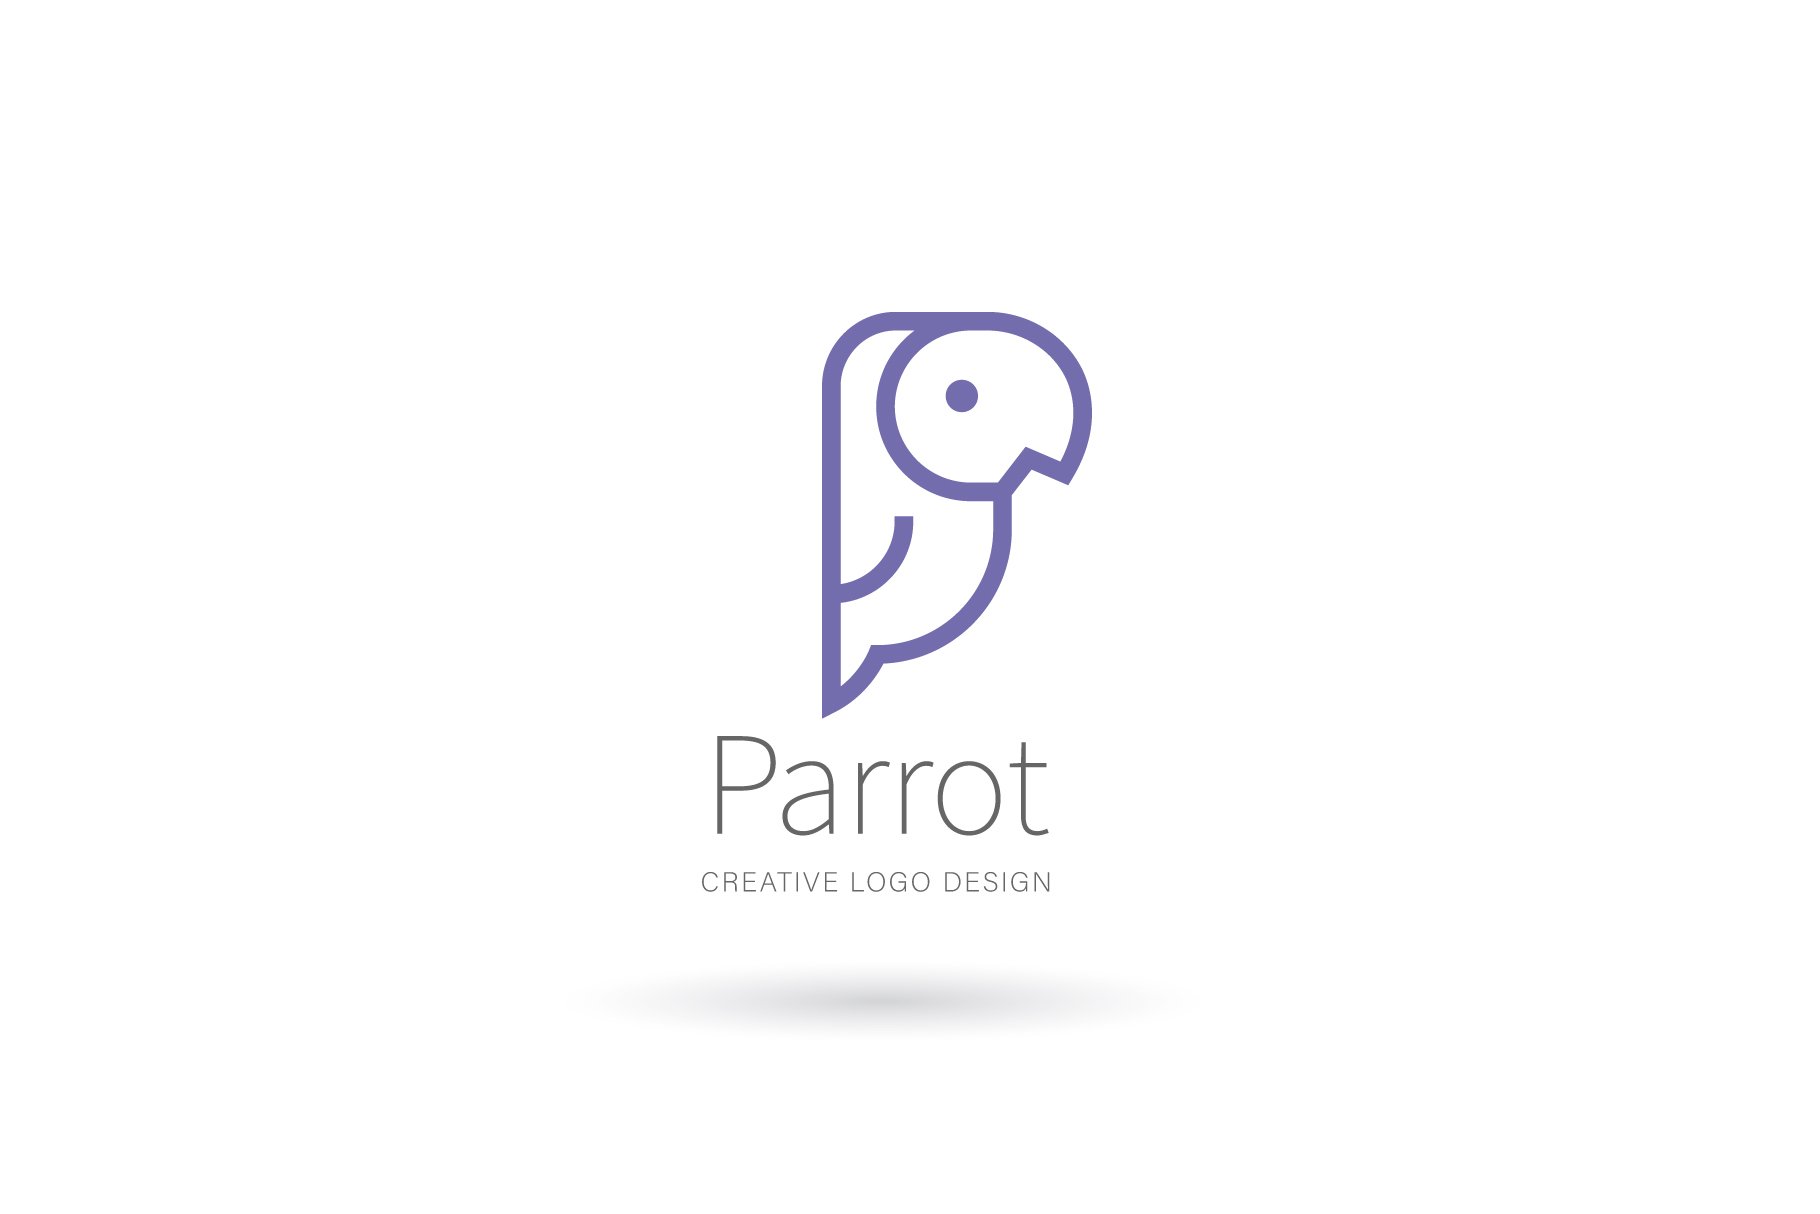 Parrot logo cover image.